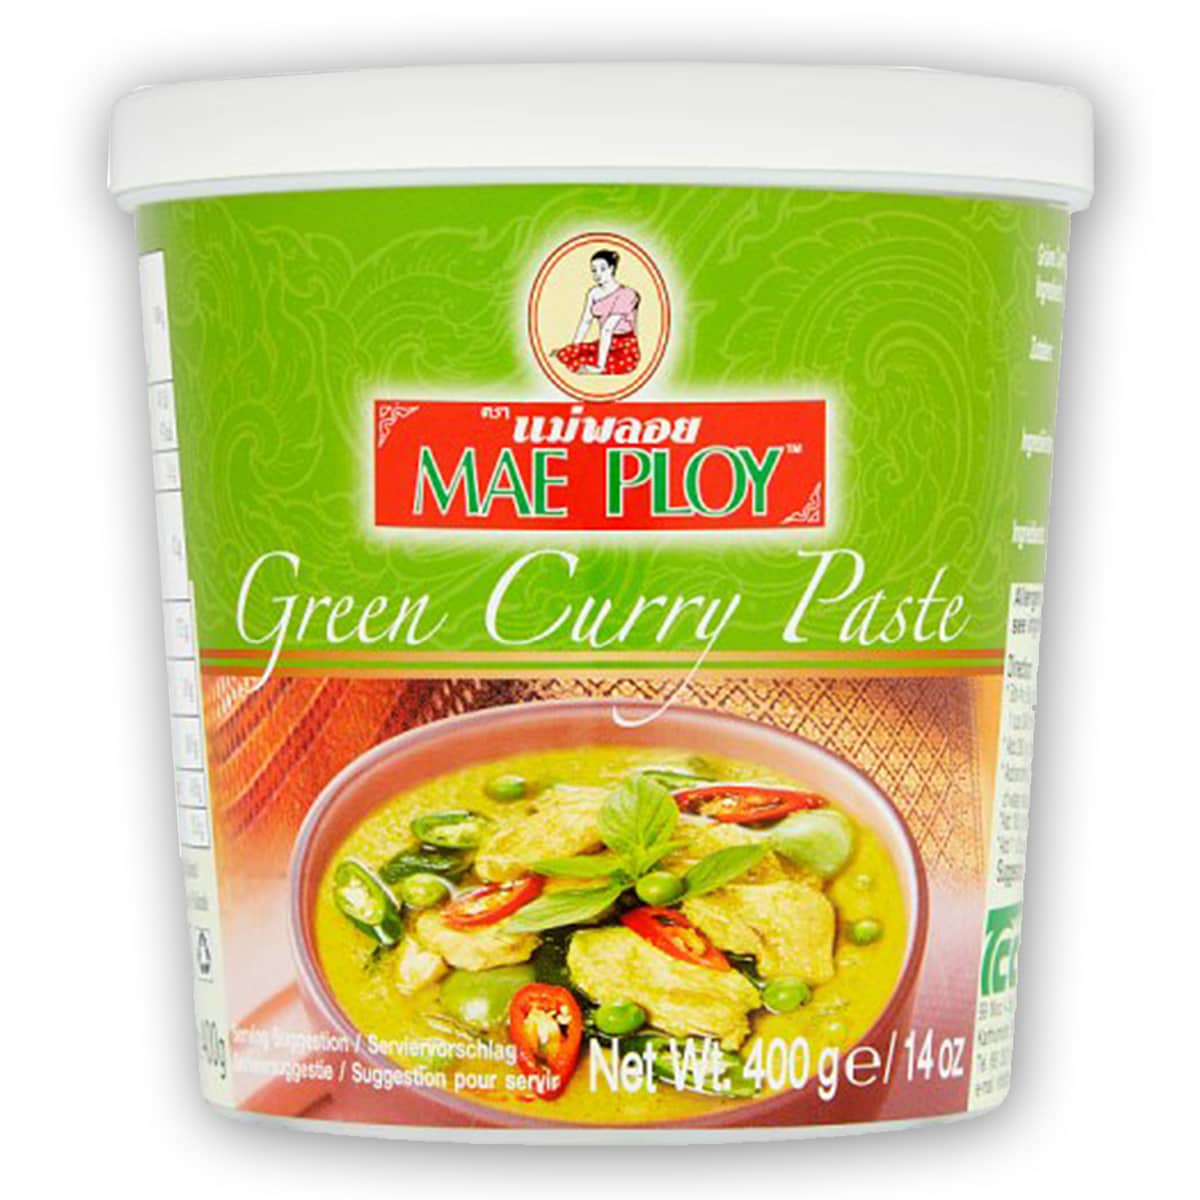 Buy Mae Ploy Green Curry Paste - 400 gm